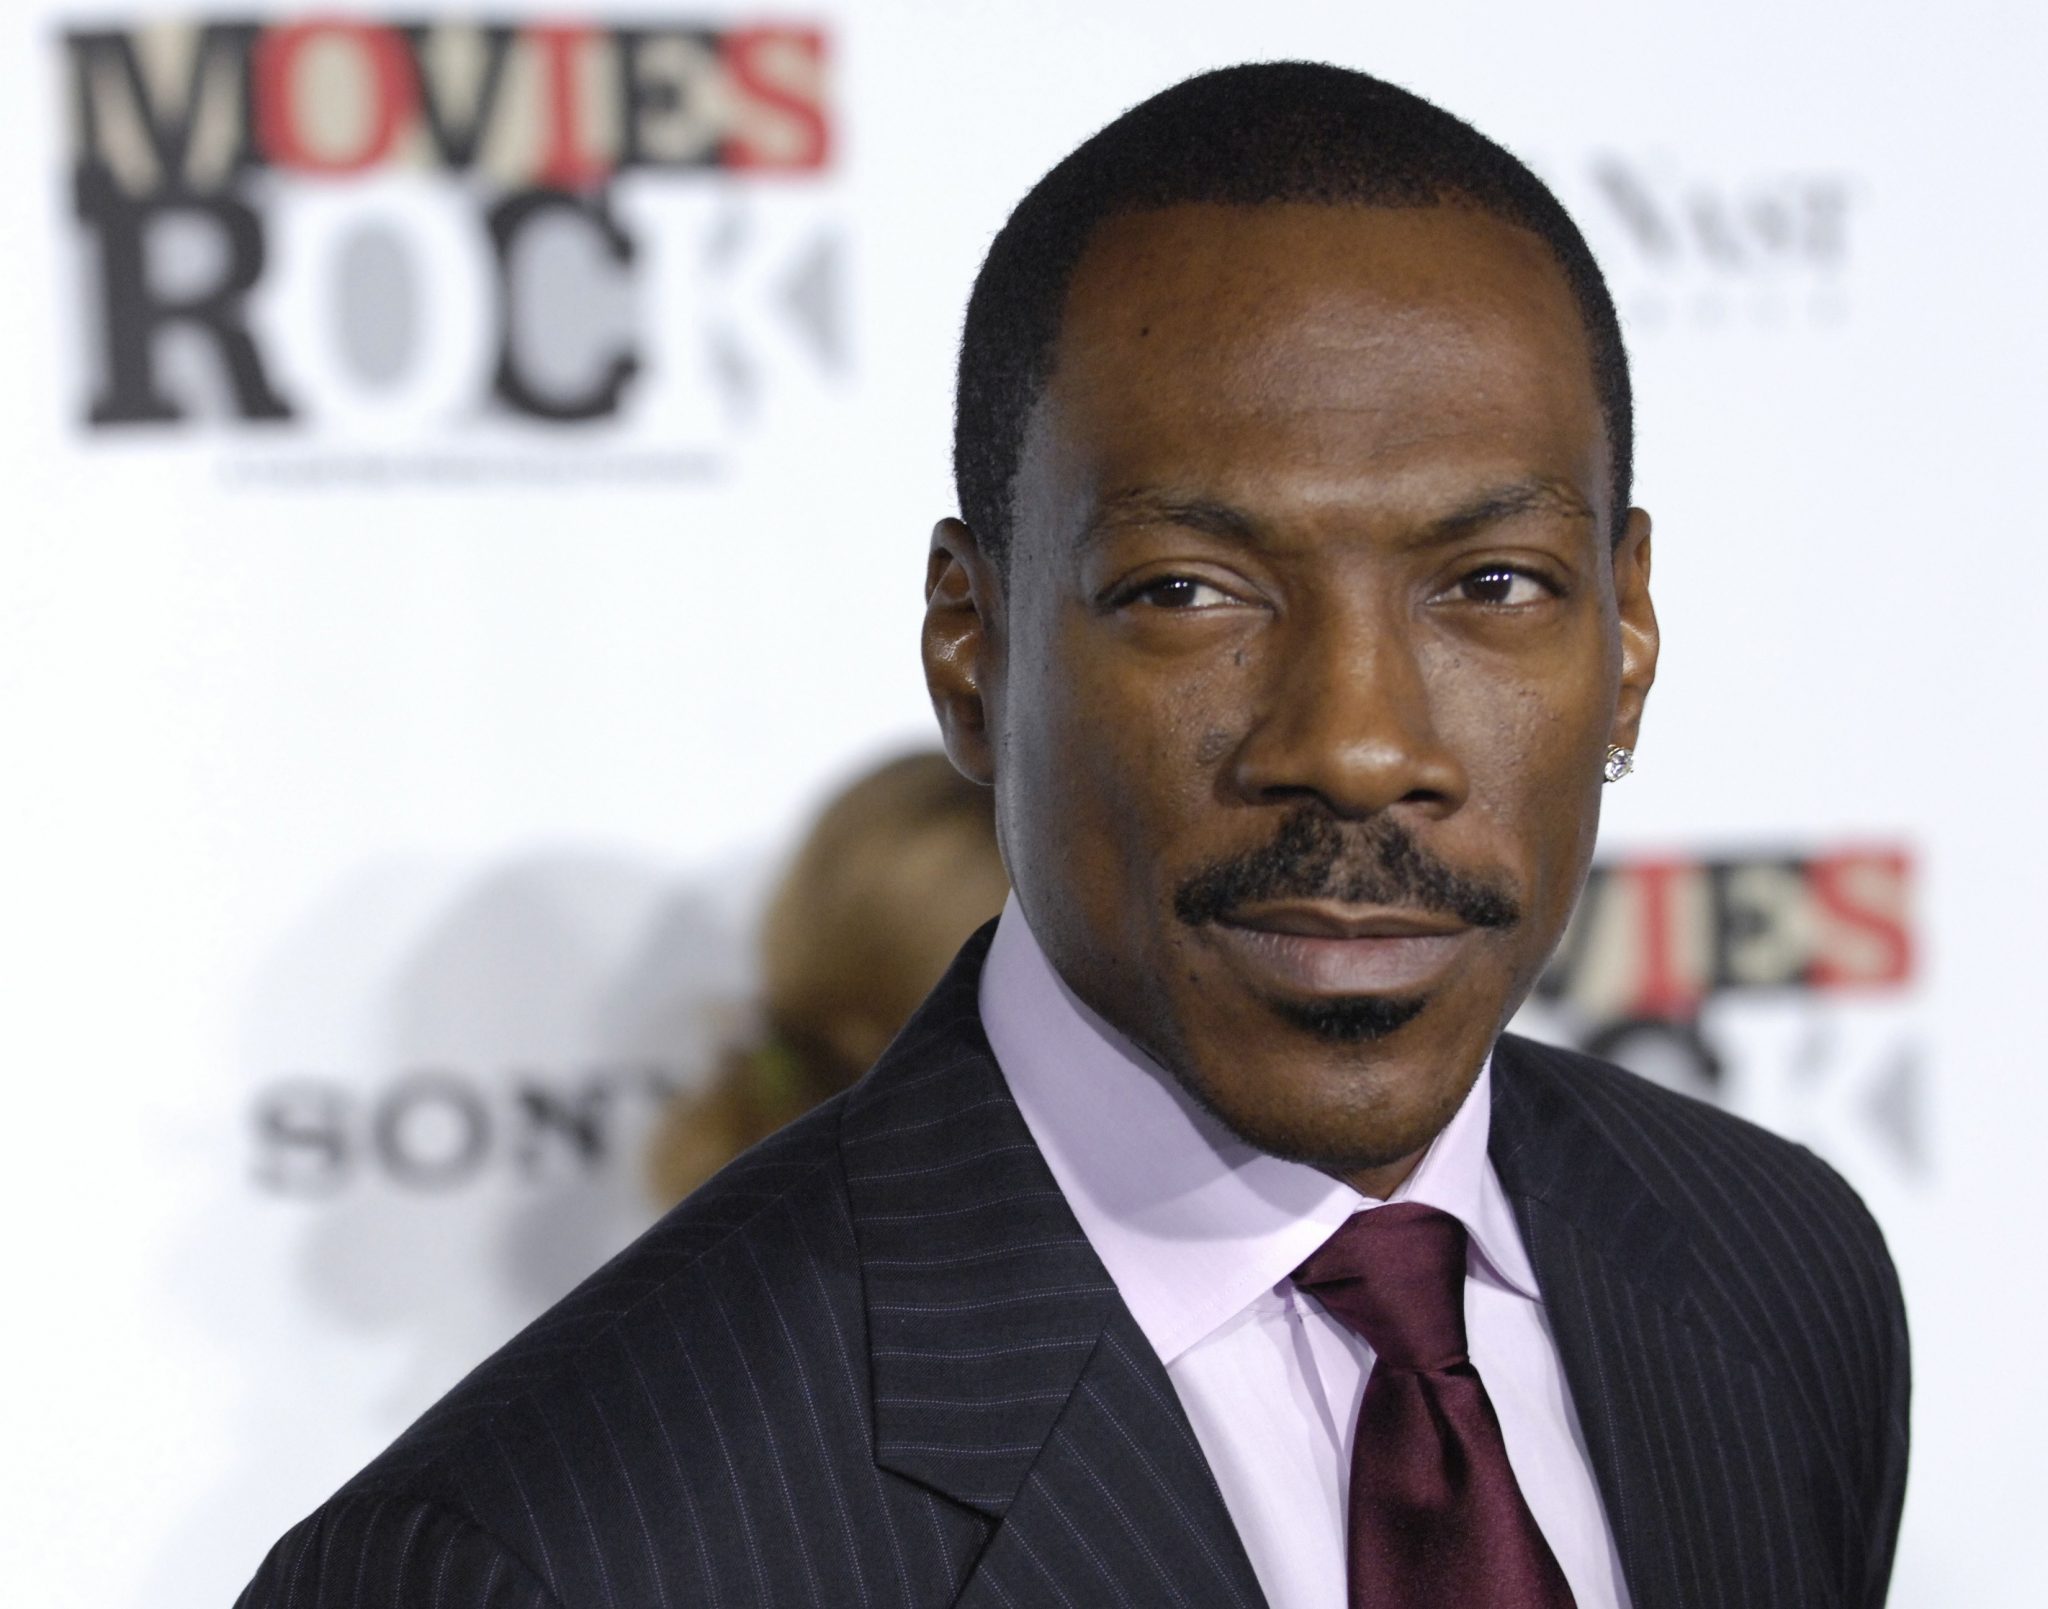 Eddie Murphy arrives at "Movies Rock: A Celebration of Music in Film," at the Kodak Theater in Los Angeles, Sunday, Dec. 2, 2007. (AP Photo/Chris Pizzello)